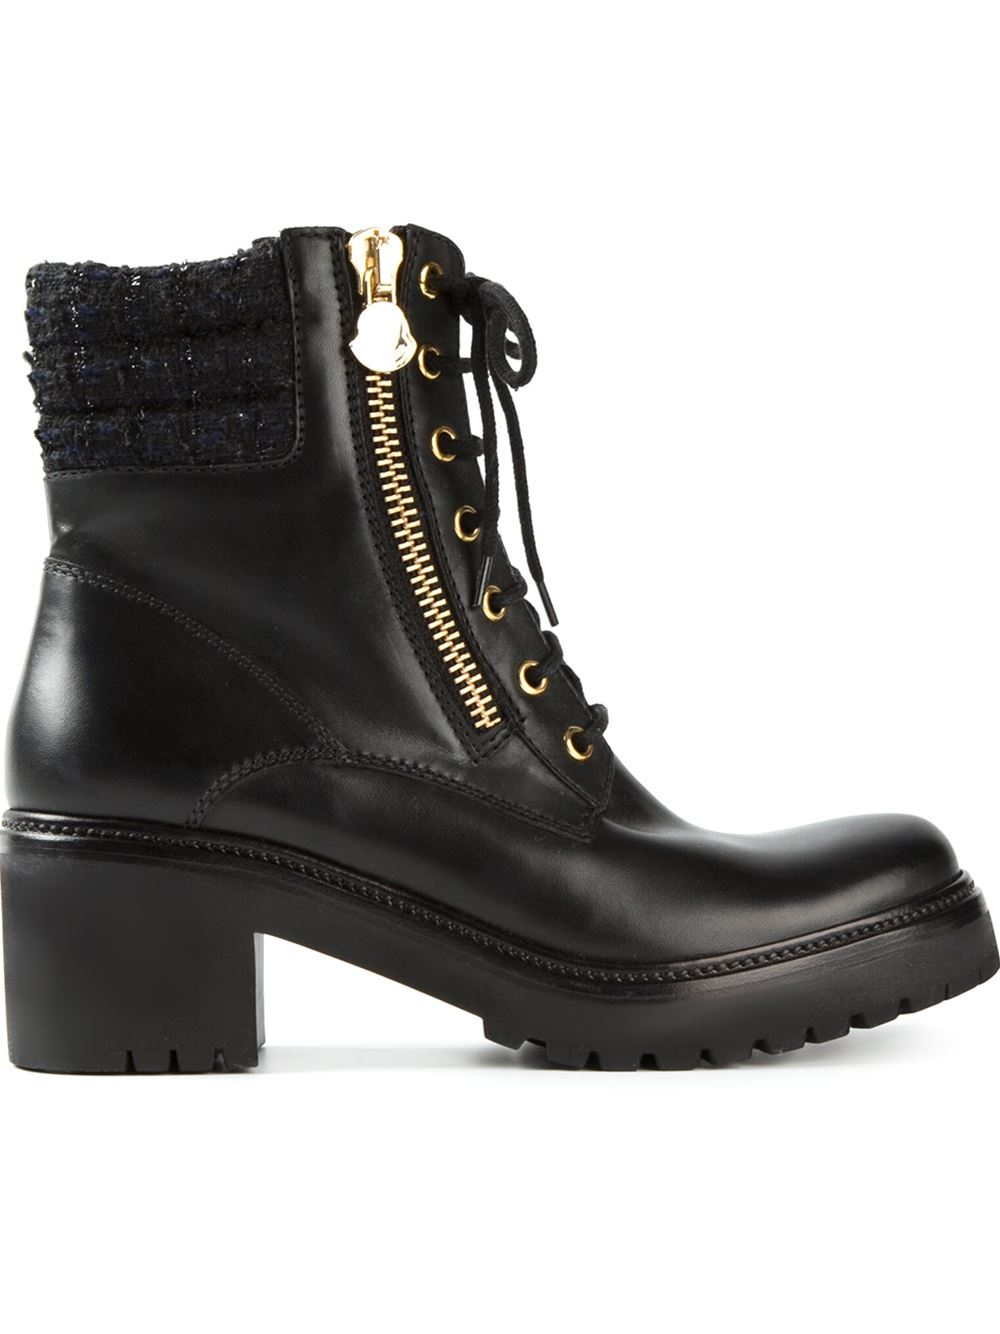 Moncler 'Viviane' Ankle Boots in Black | Lyst